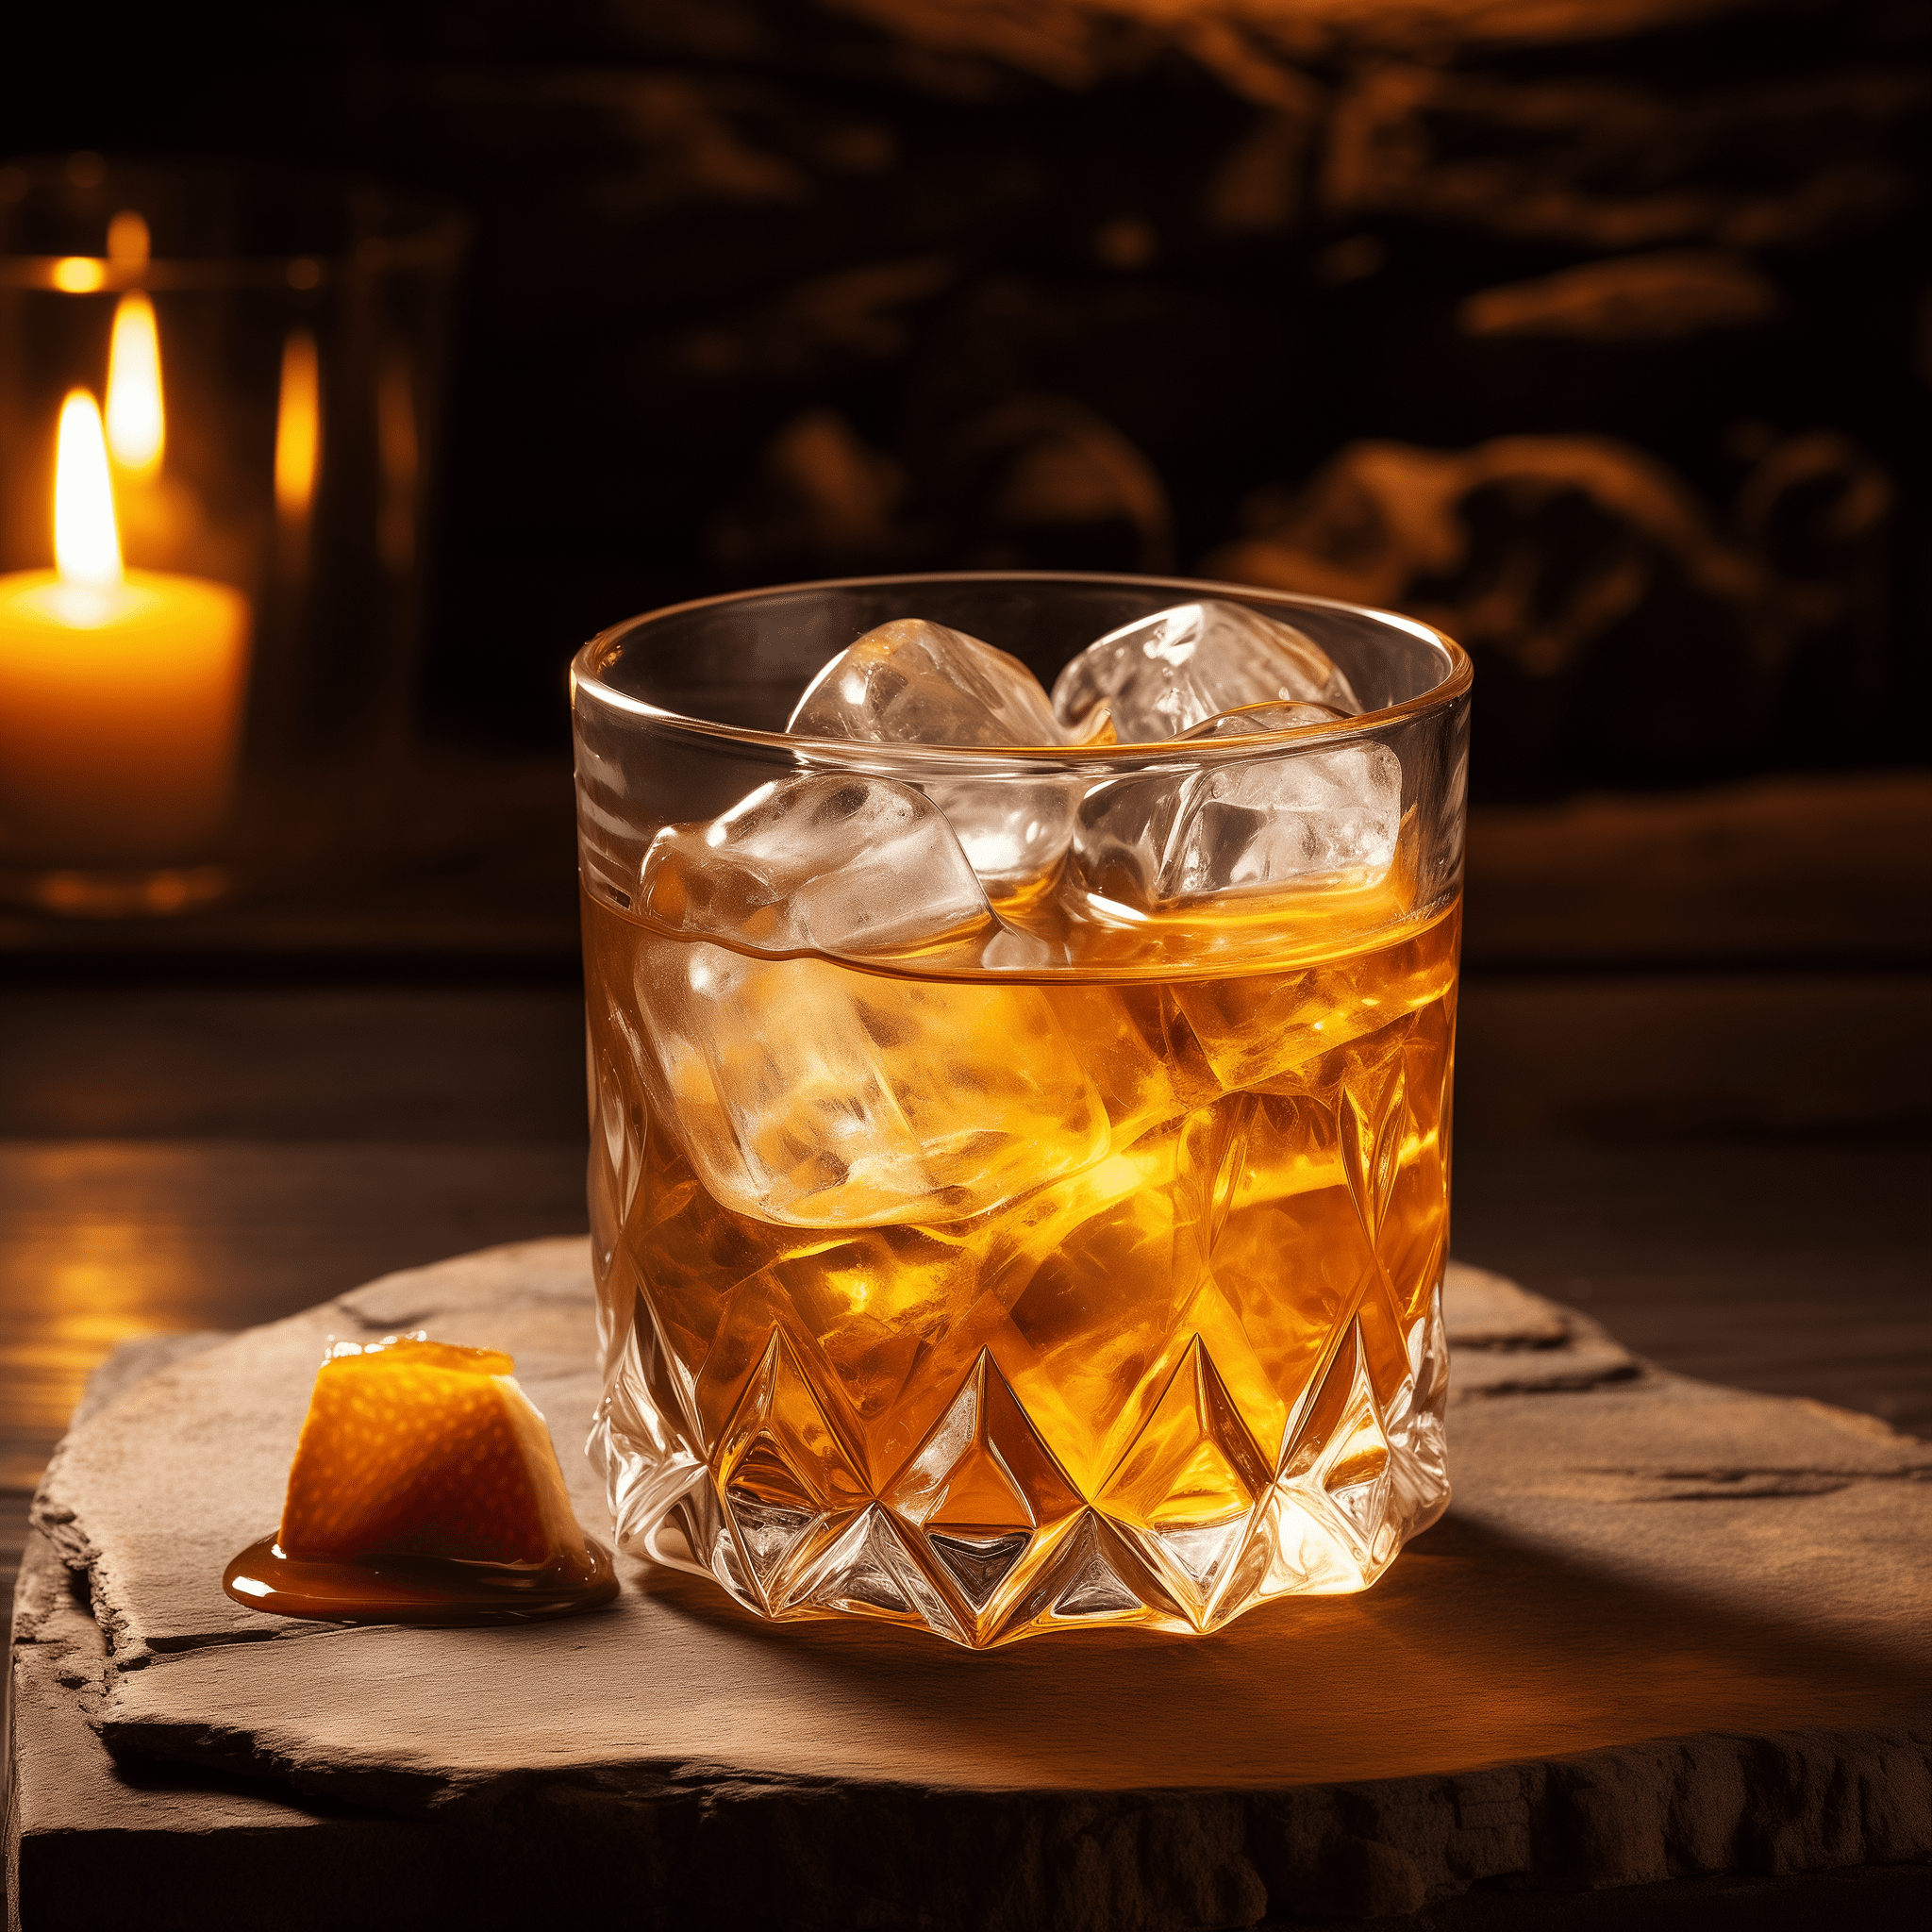 Jackhammer Cocktail Recipe - The Jackhammer is a robust cocktail with a smooth, sweet profile. The whiskey provides a warm, oaky backbone, while the amaretto imparts a rich almond sweetness that complements the whiskey's bite. It's a balanced blend of strength and sweetness.